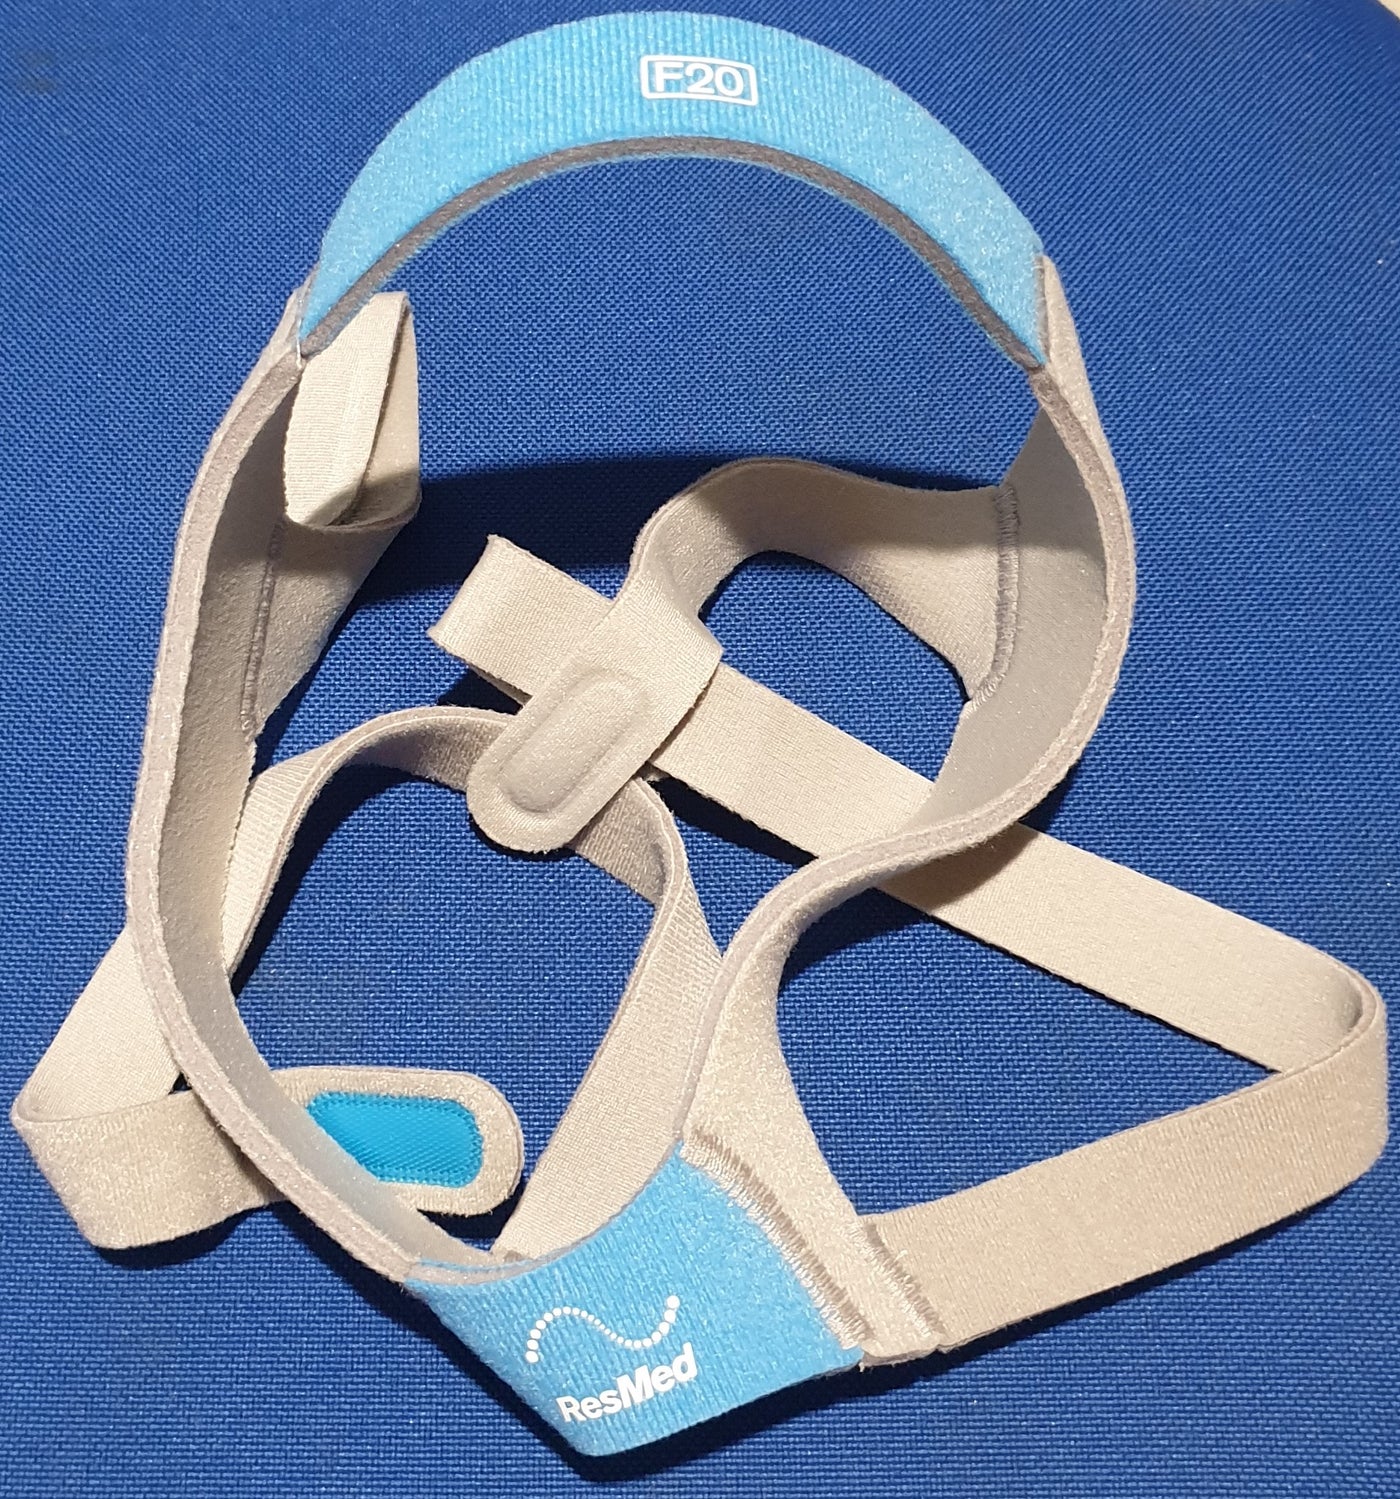 Headgear / Strap for Std Him / Her Resmed AirFit / AirTouch F20 Fullface CPAP mask